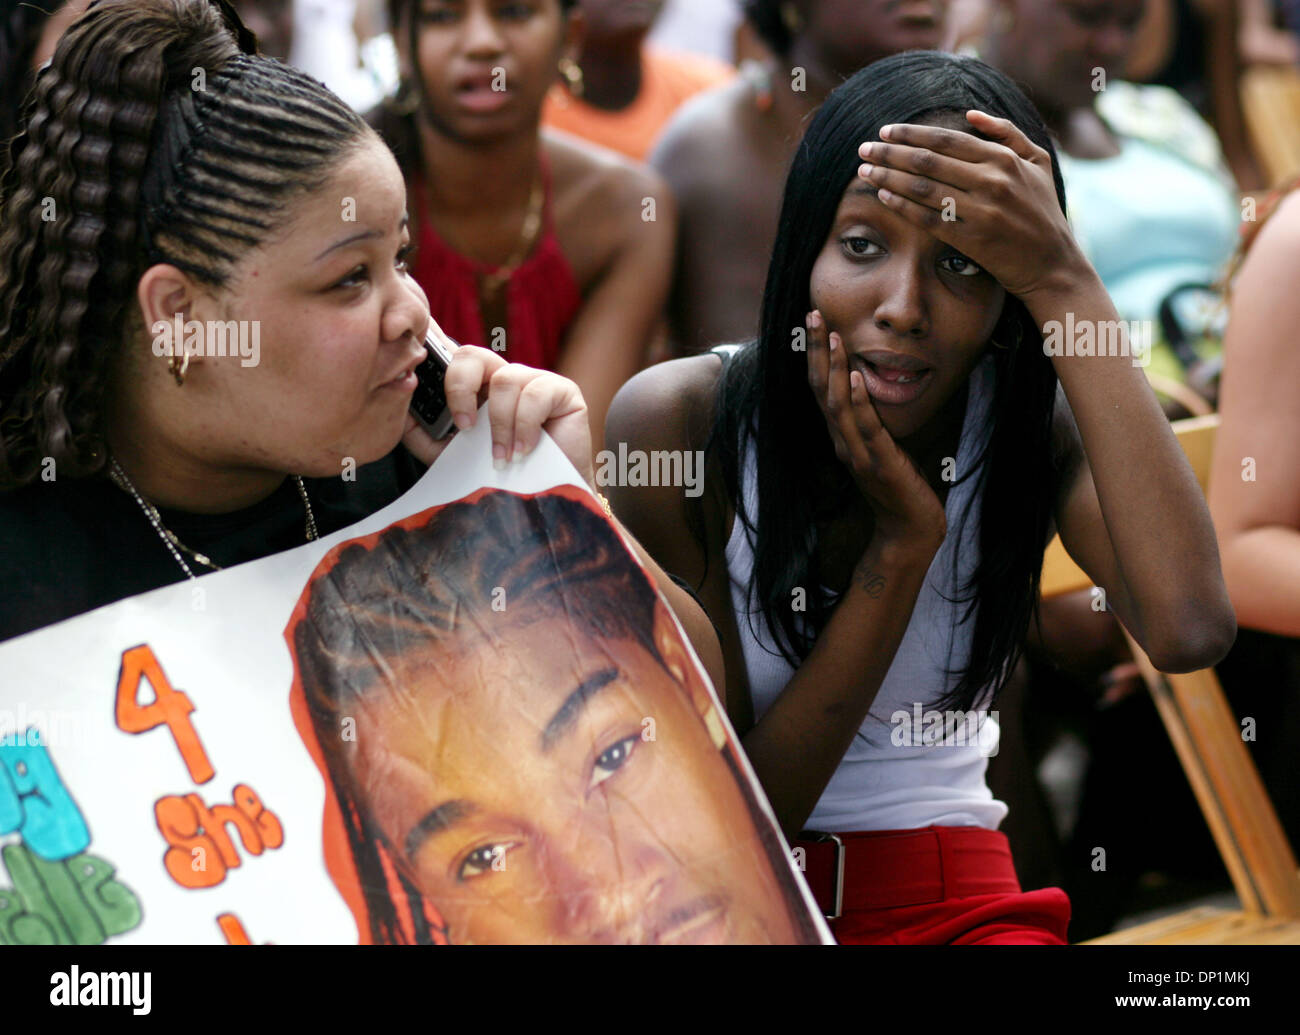 May 06, 2006; West Palm Beach, FL, USA; Shenelle Williams, 21, left, of Margate, and Dina Joseph, 18, rigth, of Pompano Beach, wait for R & B singer Omarion to take the stage at Sunfest in West Palm Beach Saturday. Mandatory Credit: Photo by Gary Coronado/Palm Beach Post/ZUMA Press. (©) Copyright 2006 by Palm Beach Post Stock Photo